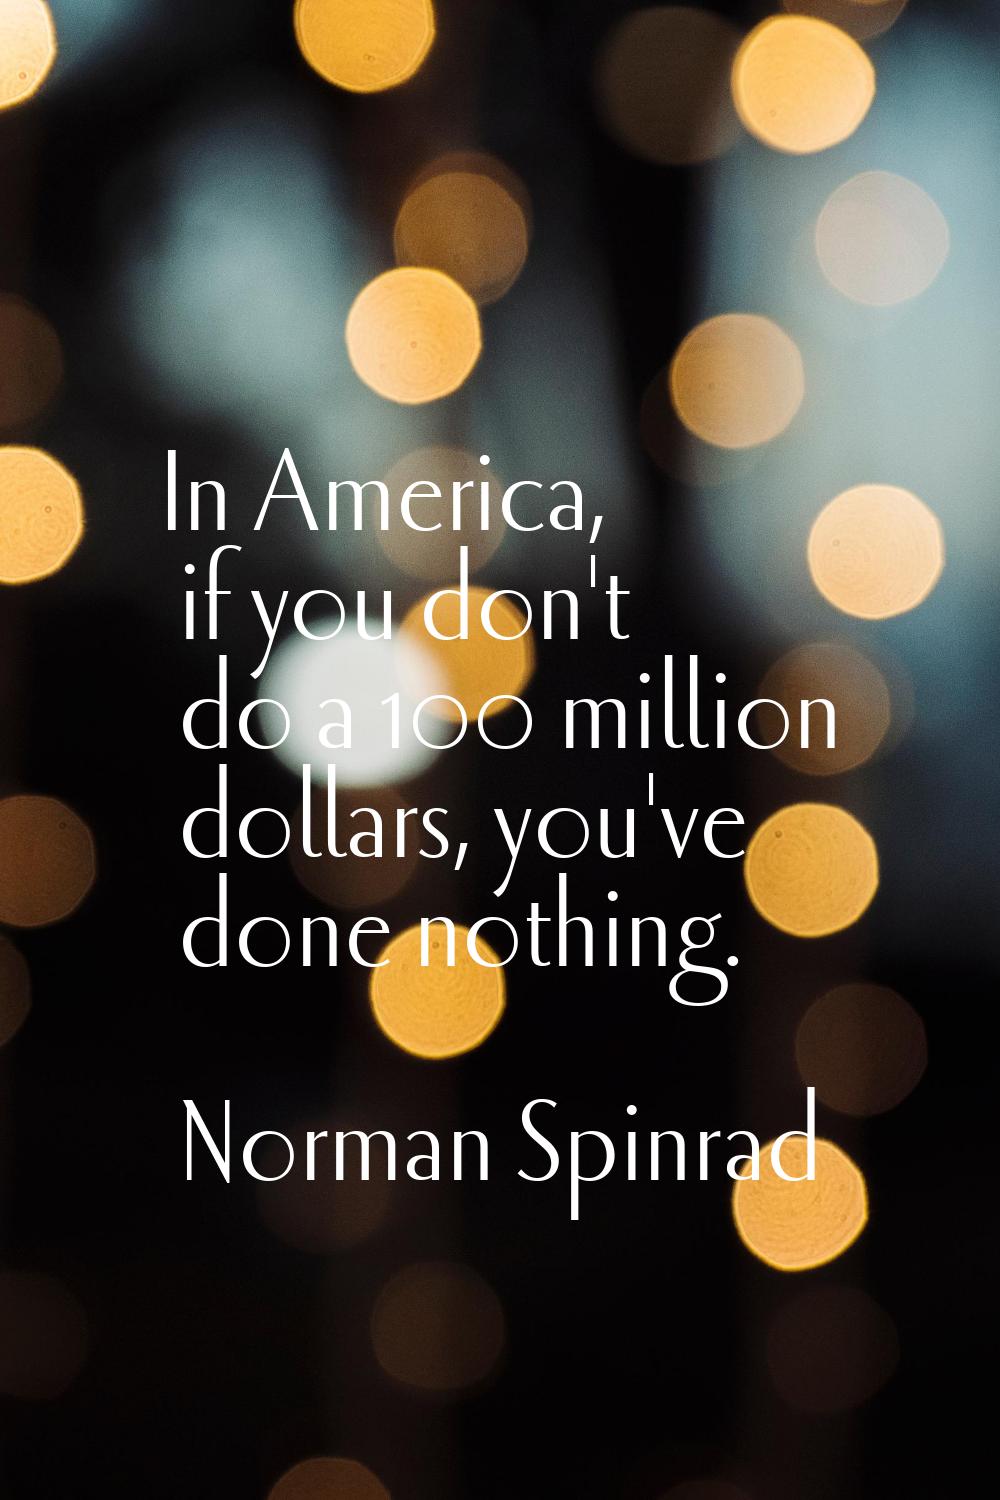 In America, if you don't do a 100 million dollars, you've done nothing.